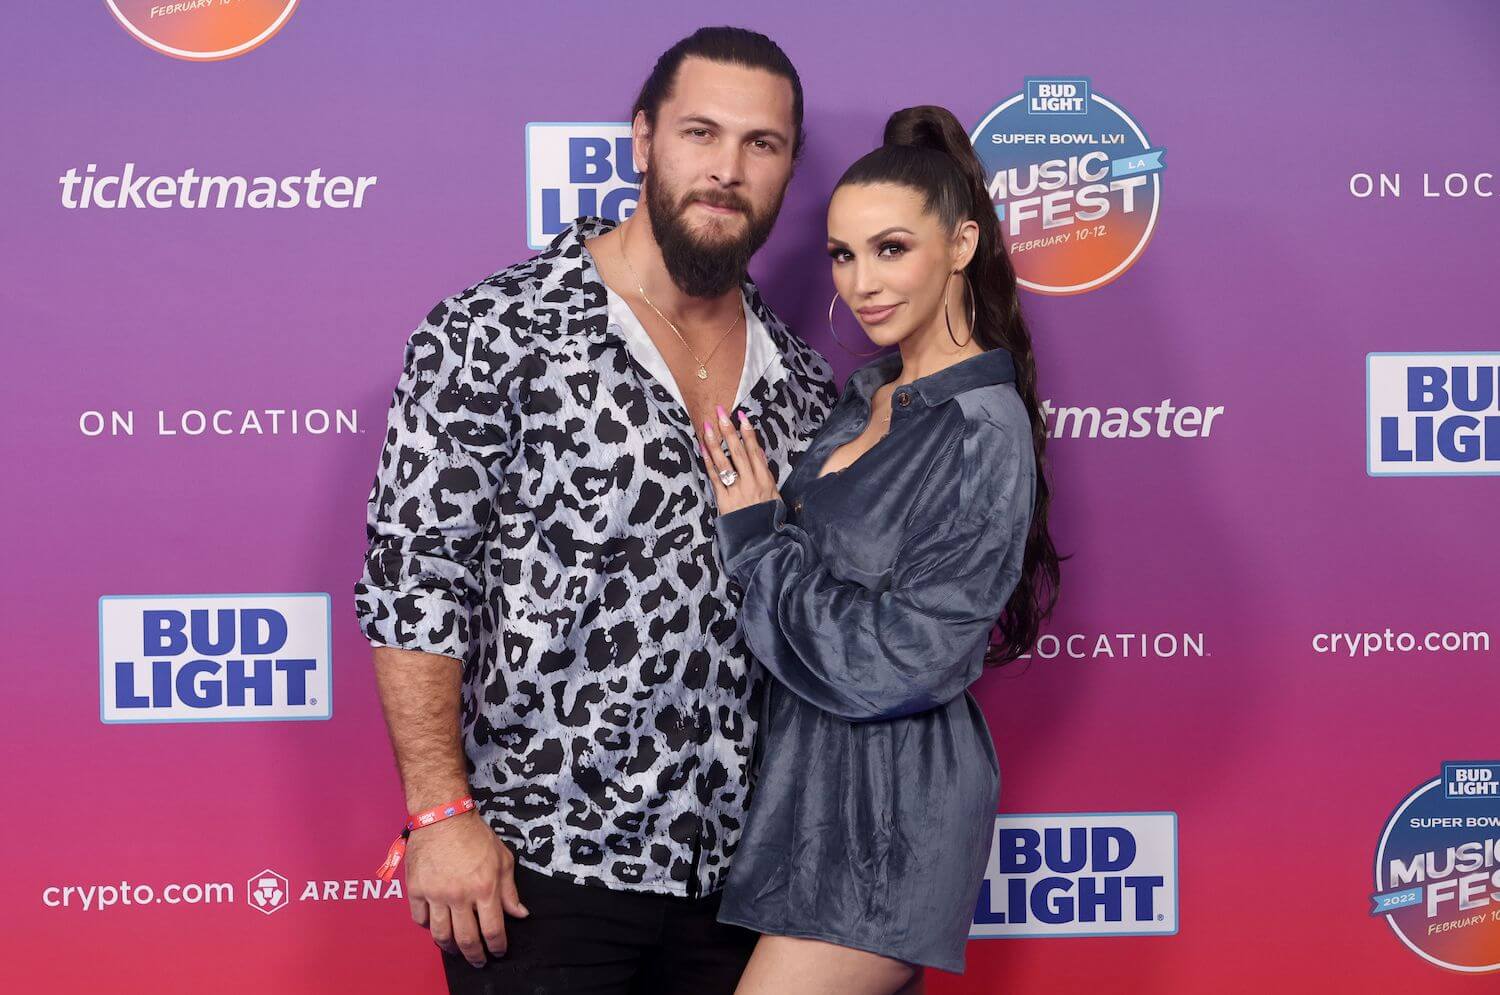 'Vanderpump Rules' stars Brock Davies and Scheana Shay standing closely side by side at an event